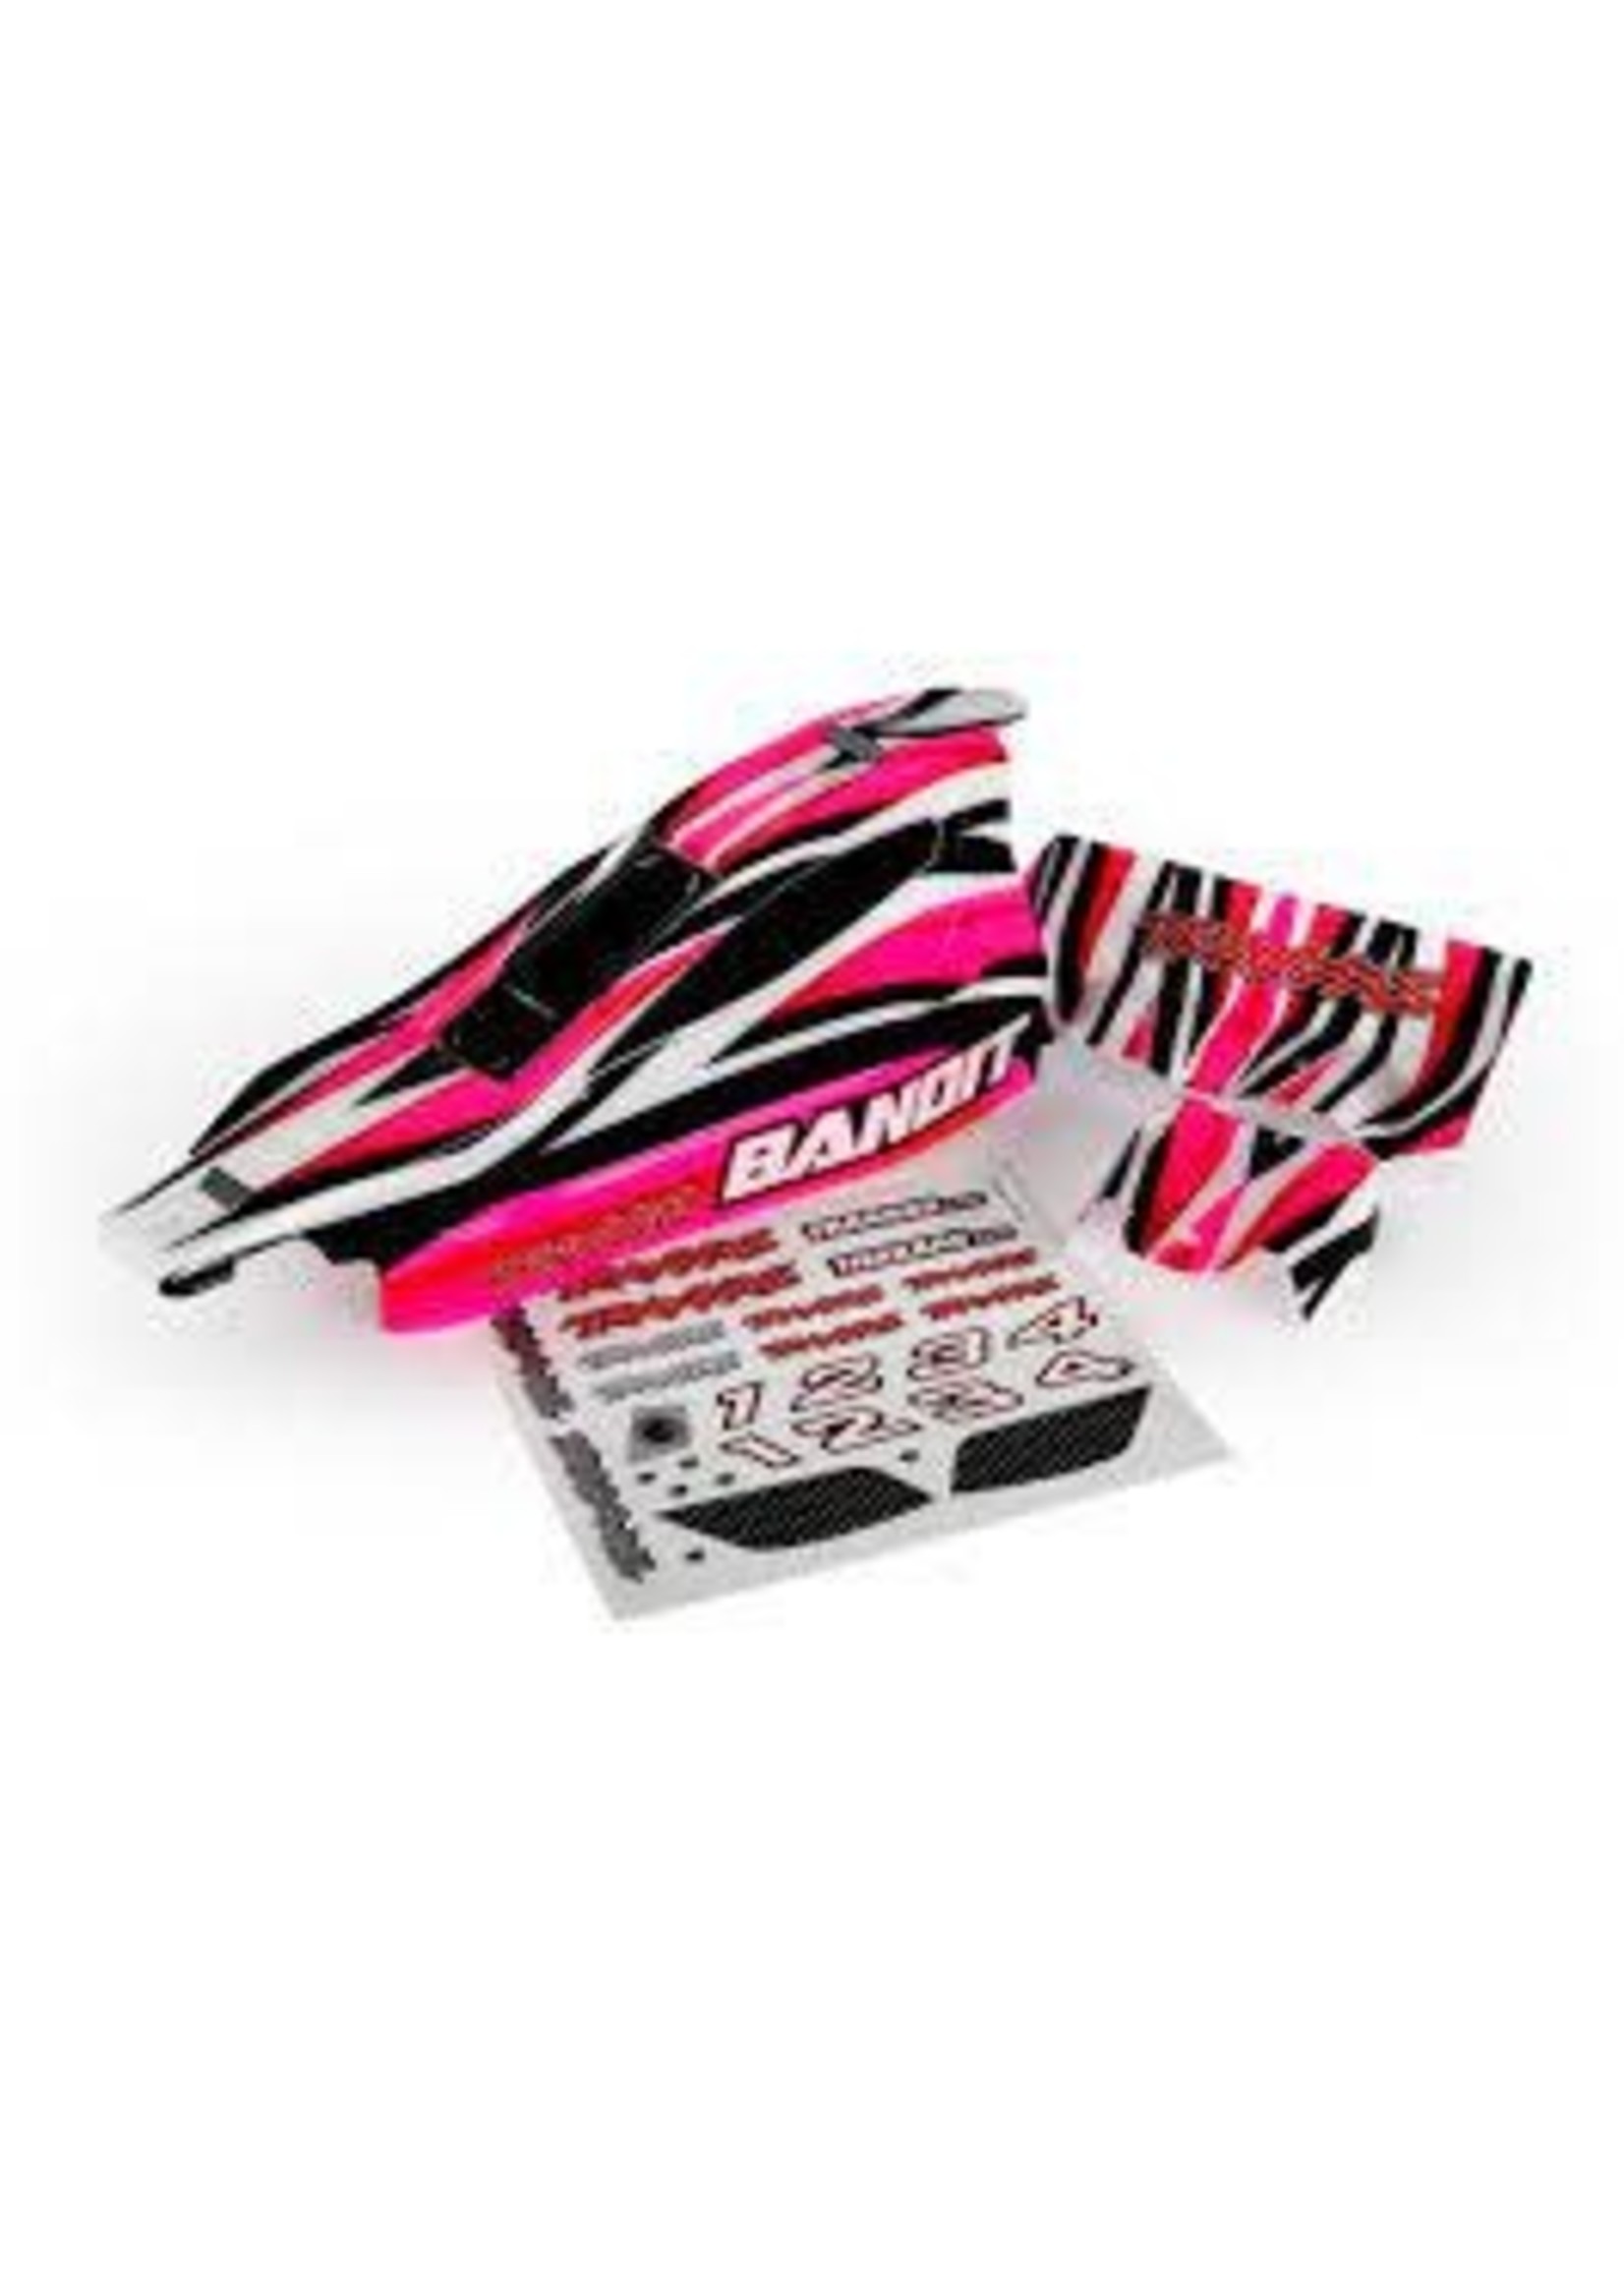 Traxxas 2433 Traxxas Body, Bandit, Pink Painted, Decals Applied